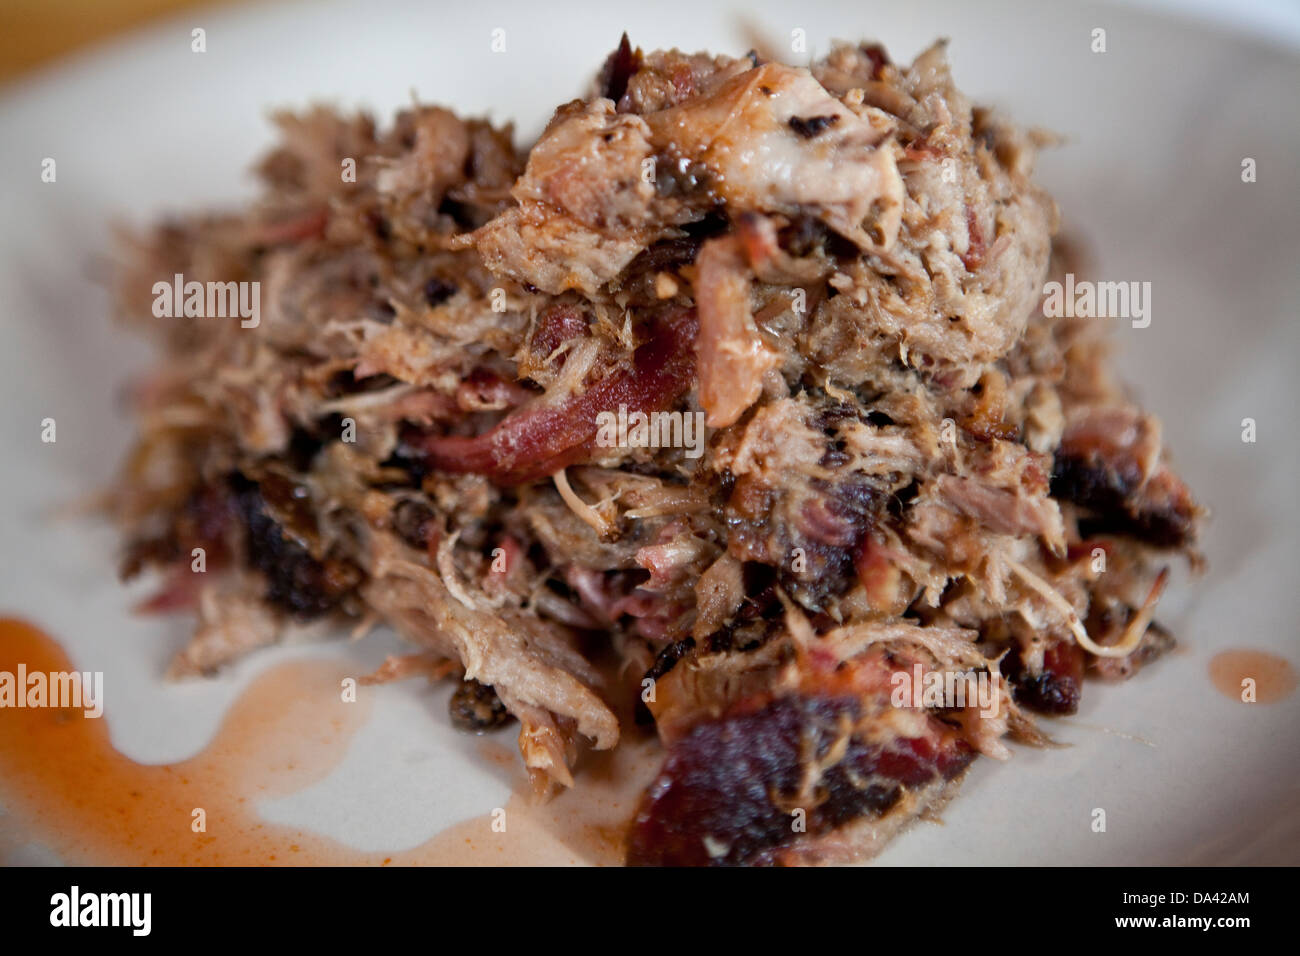 A Pulled pork plate is seen at Slows Bar-B-Q in Detroit (Mi) Stock Photo